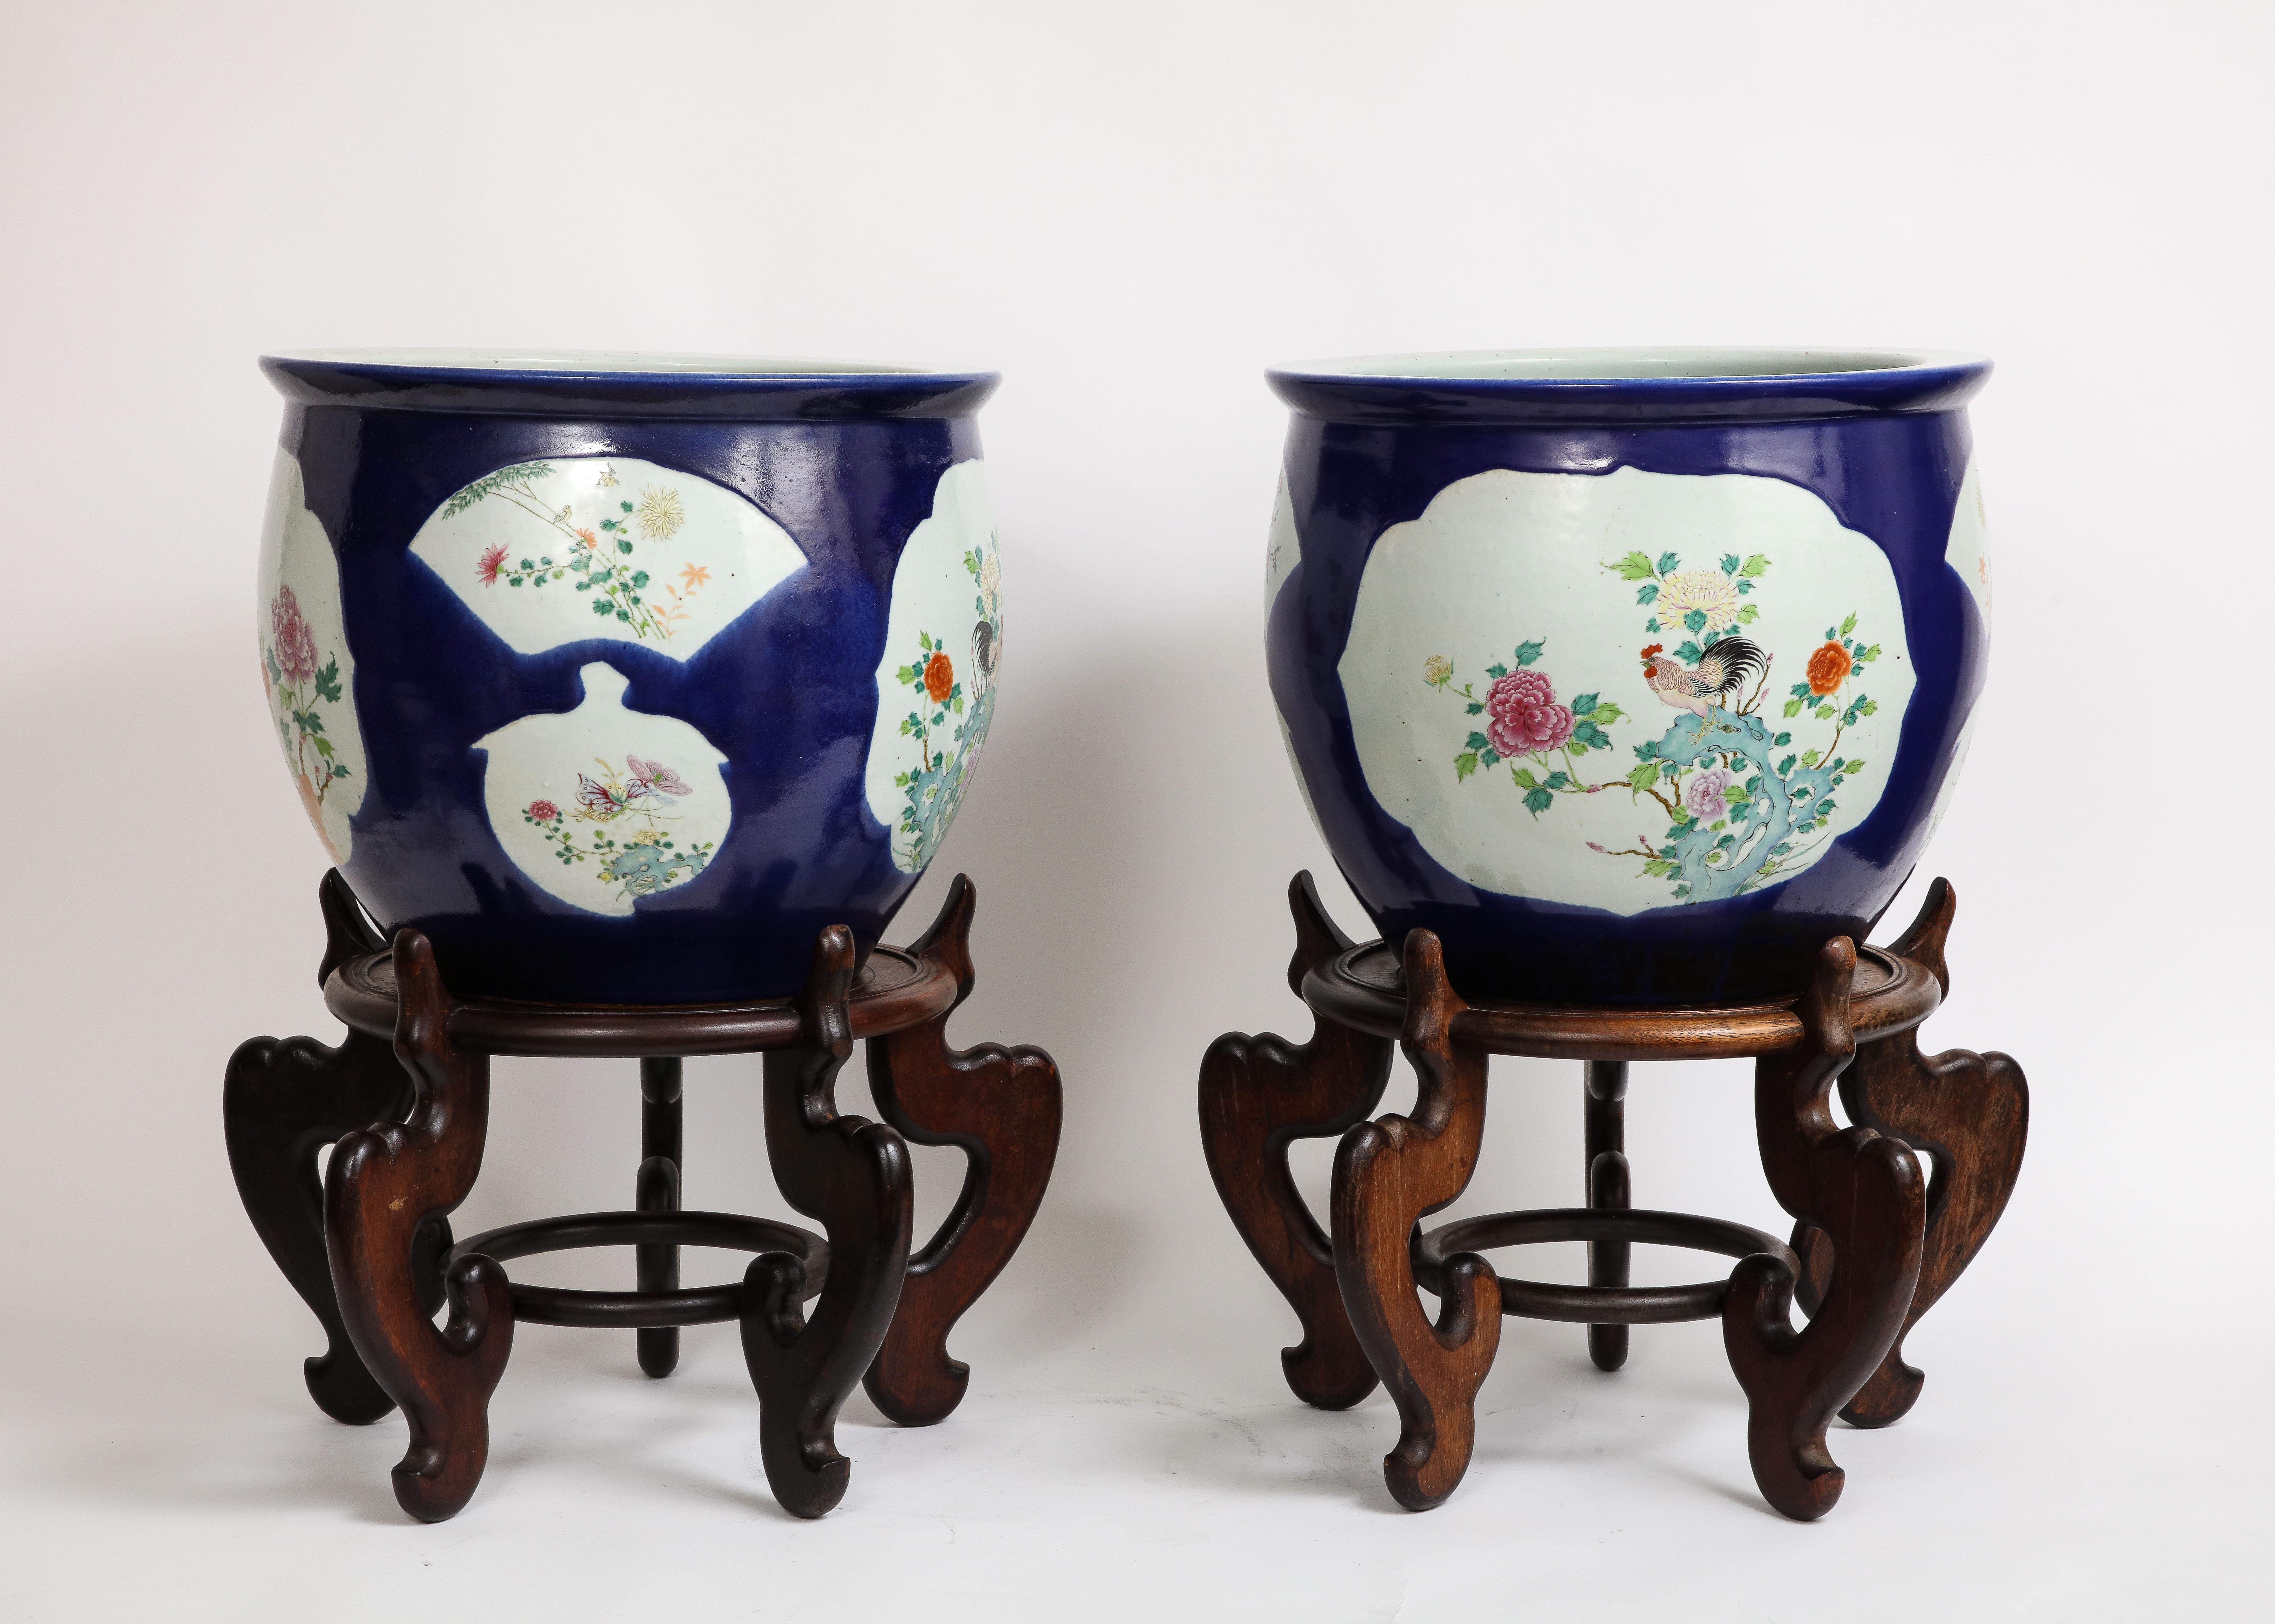 A Beautiful Pair of Chinese Bleu Poudre Ground Porcelain Double Cartouche Planters on Wood Stands. These porcelain ceramic marvels command attention and admiration. Graced with scalloped border panels on both sides, they display graceful portrayals